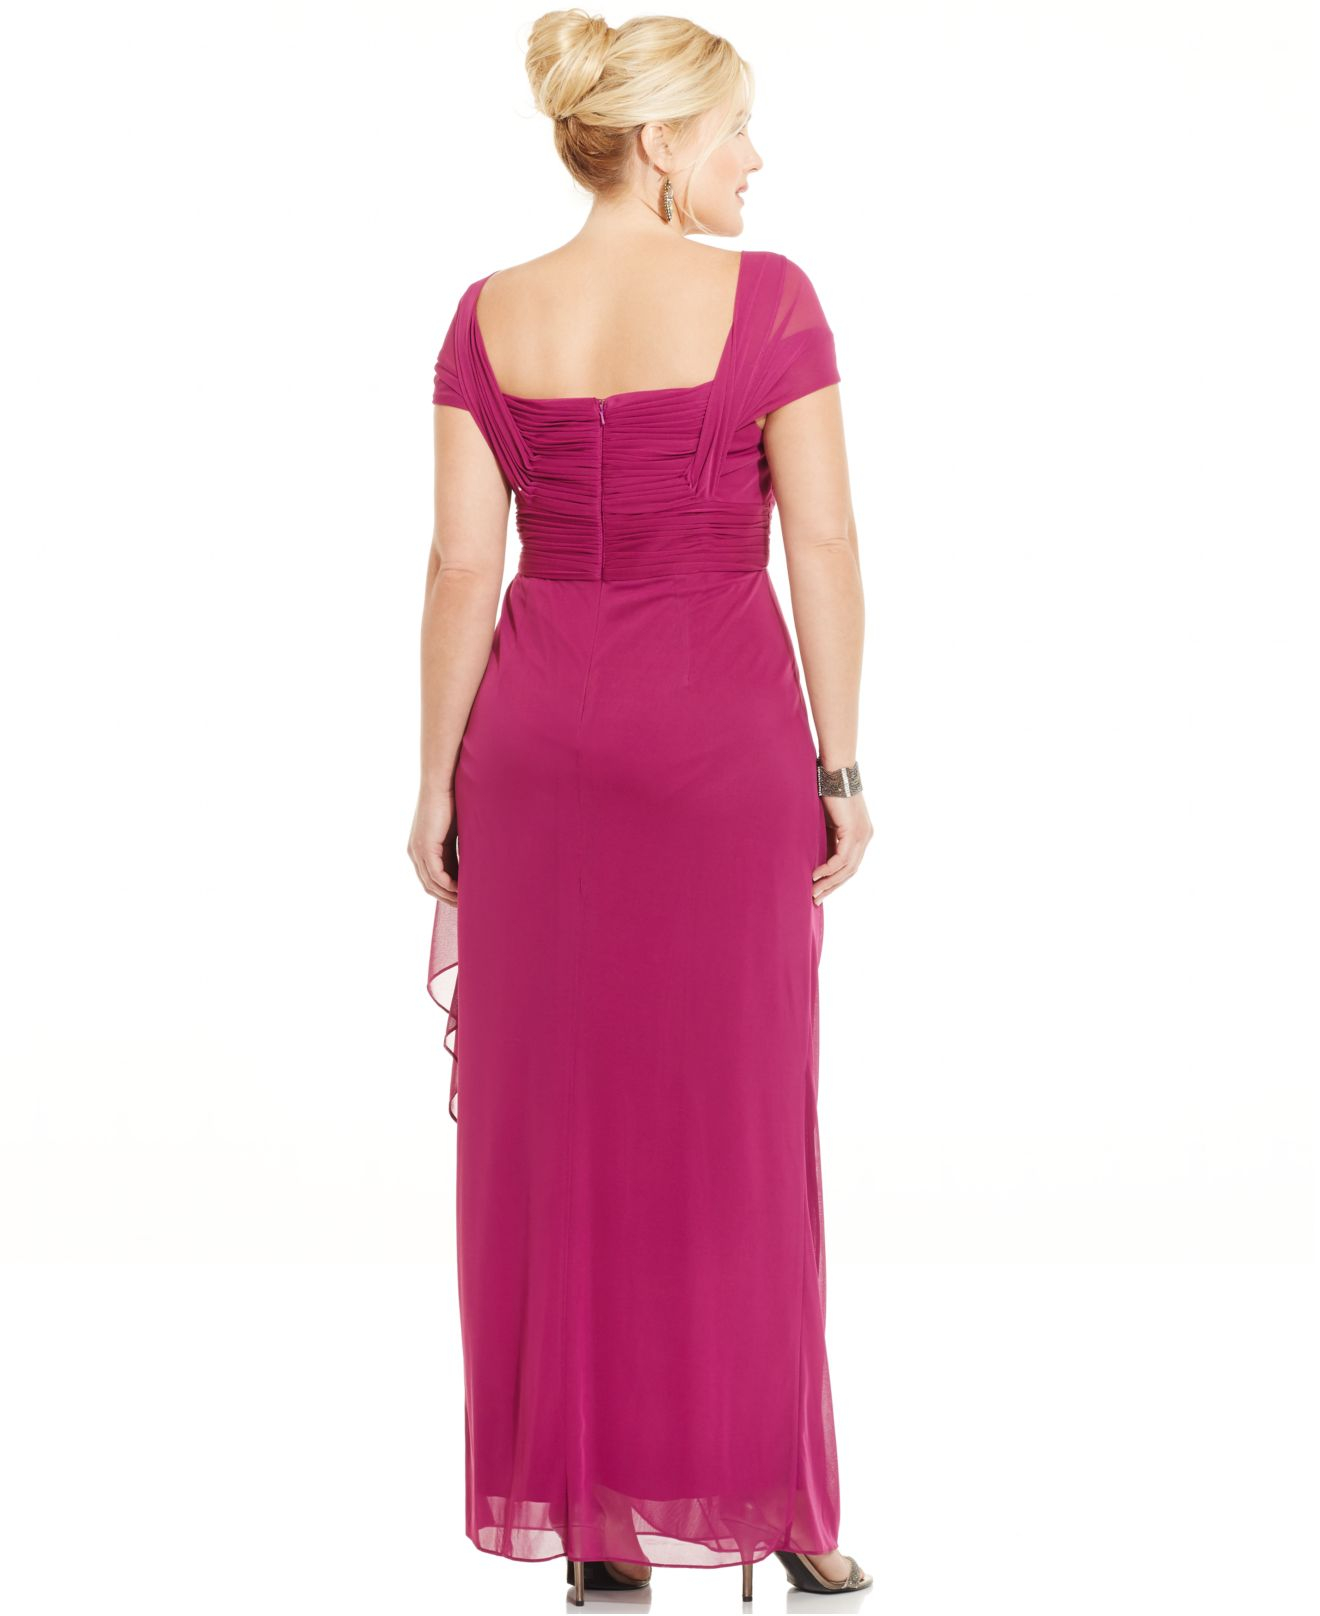 Lyst - Alex Evenings Plus Size Ruched Cascade Ruffle Gown in Purple